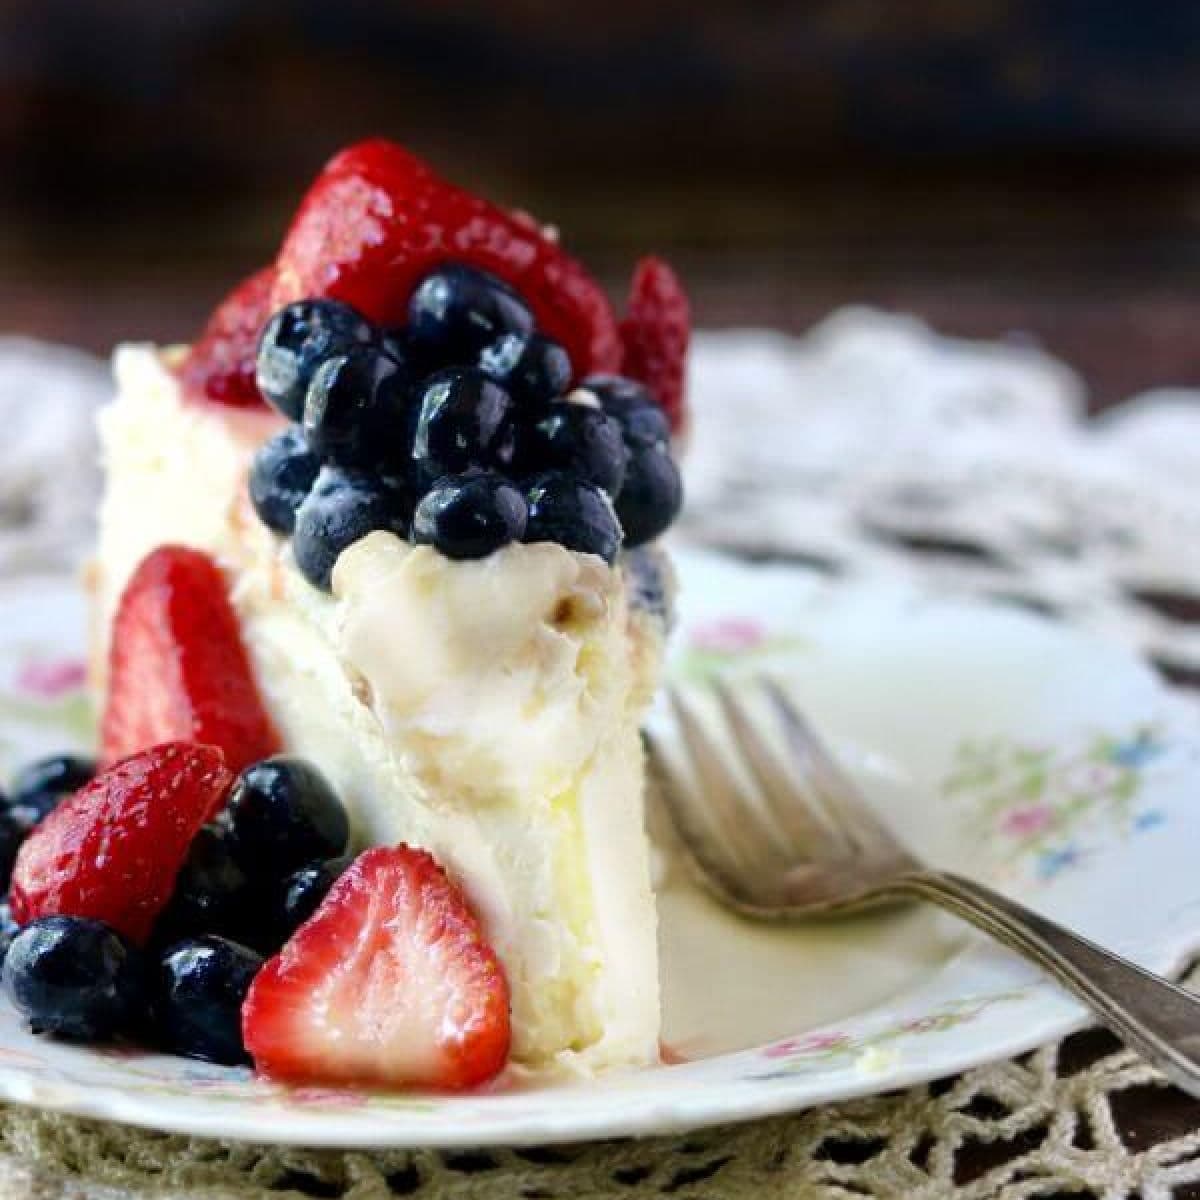 Slice of cheesecake with strawberries and blueberries on top.